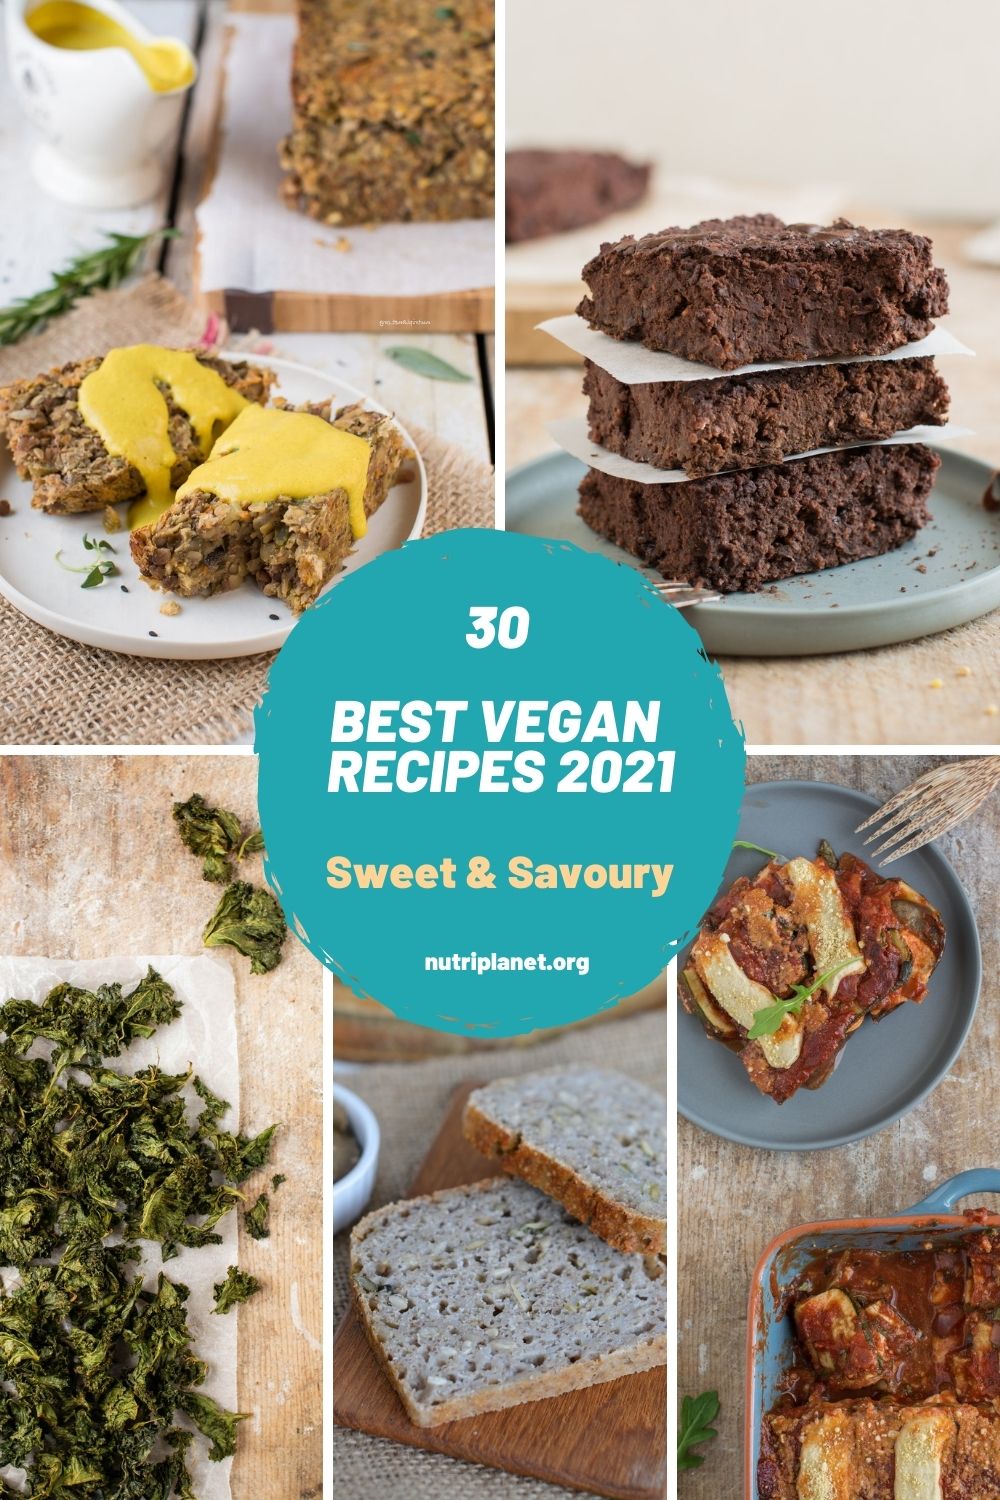 Find out which were the best vegan recipes on my whole food plant-based blog in 2021. Among the recipes you'll find low glycemic breakfasts (pancakes, oatmeal, porridge), sweet and savoury muffins, sourdough bread, and snacks (parfait, bliss balls, chips).